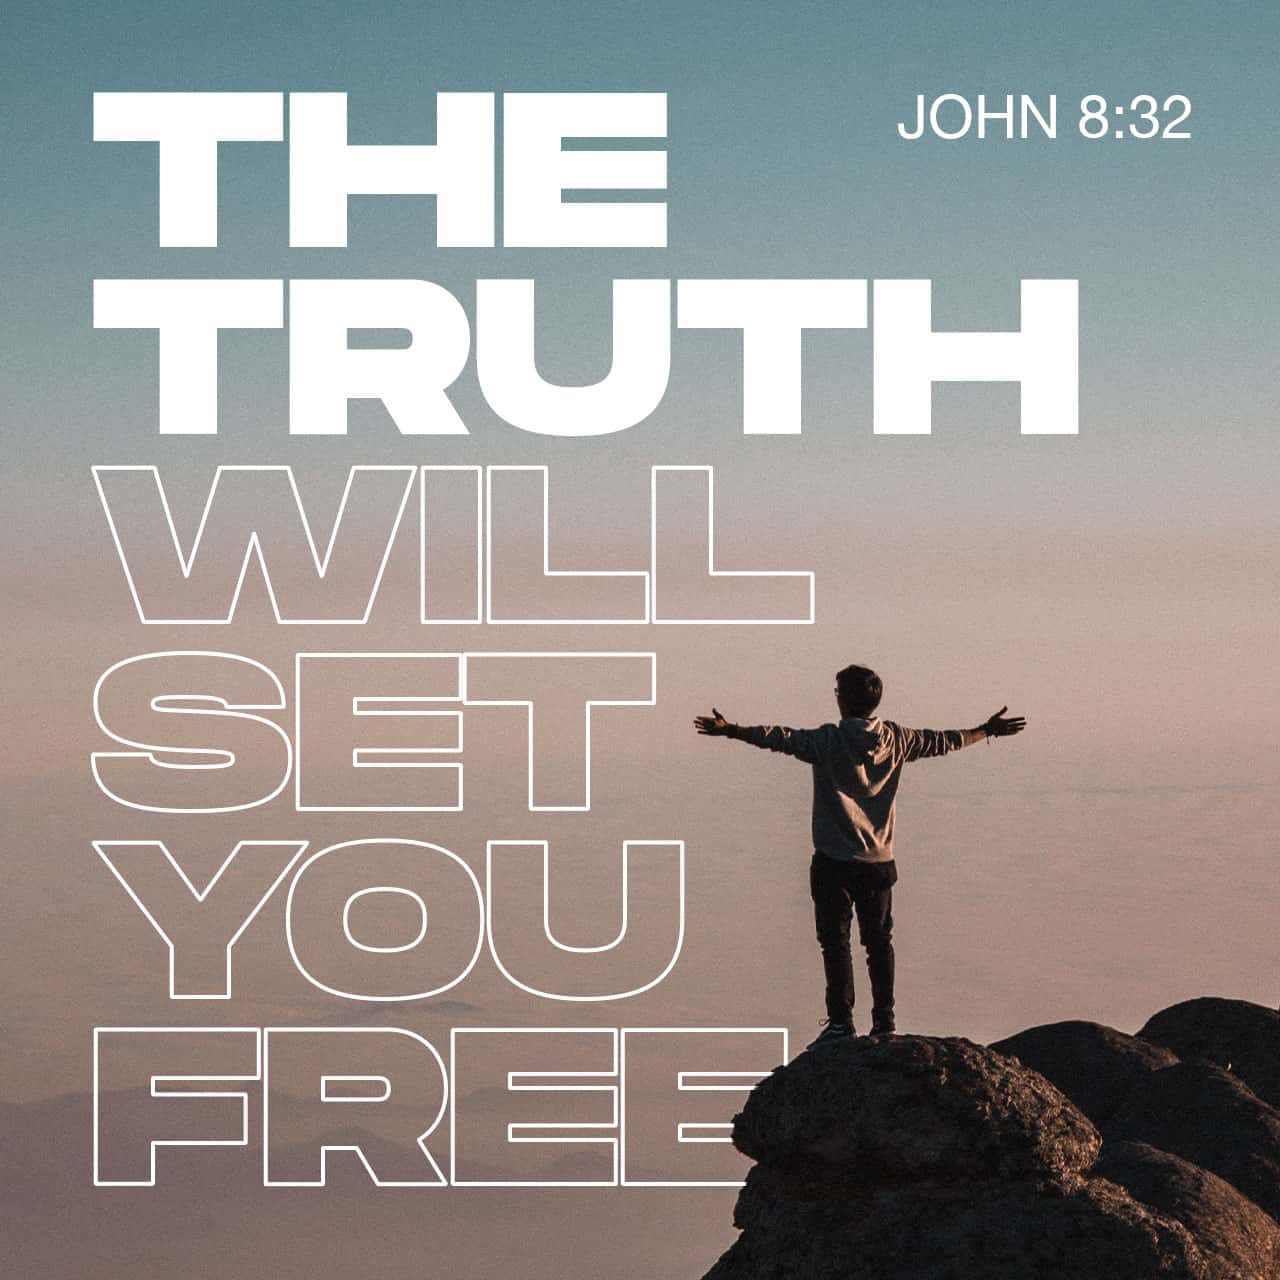 Where in the Bible does it say the truth shall make you free?